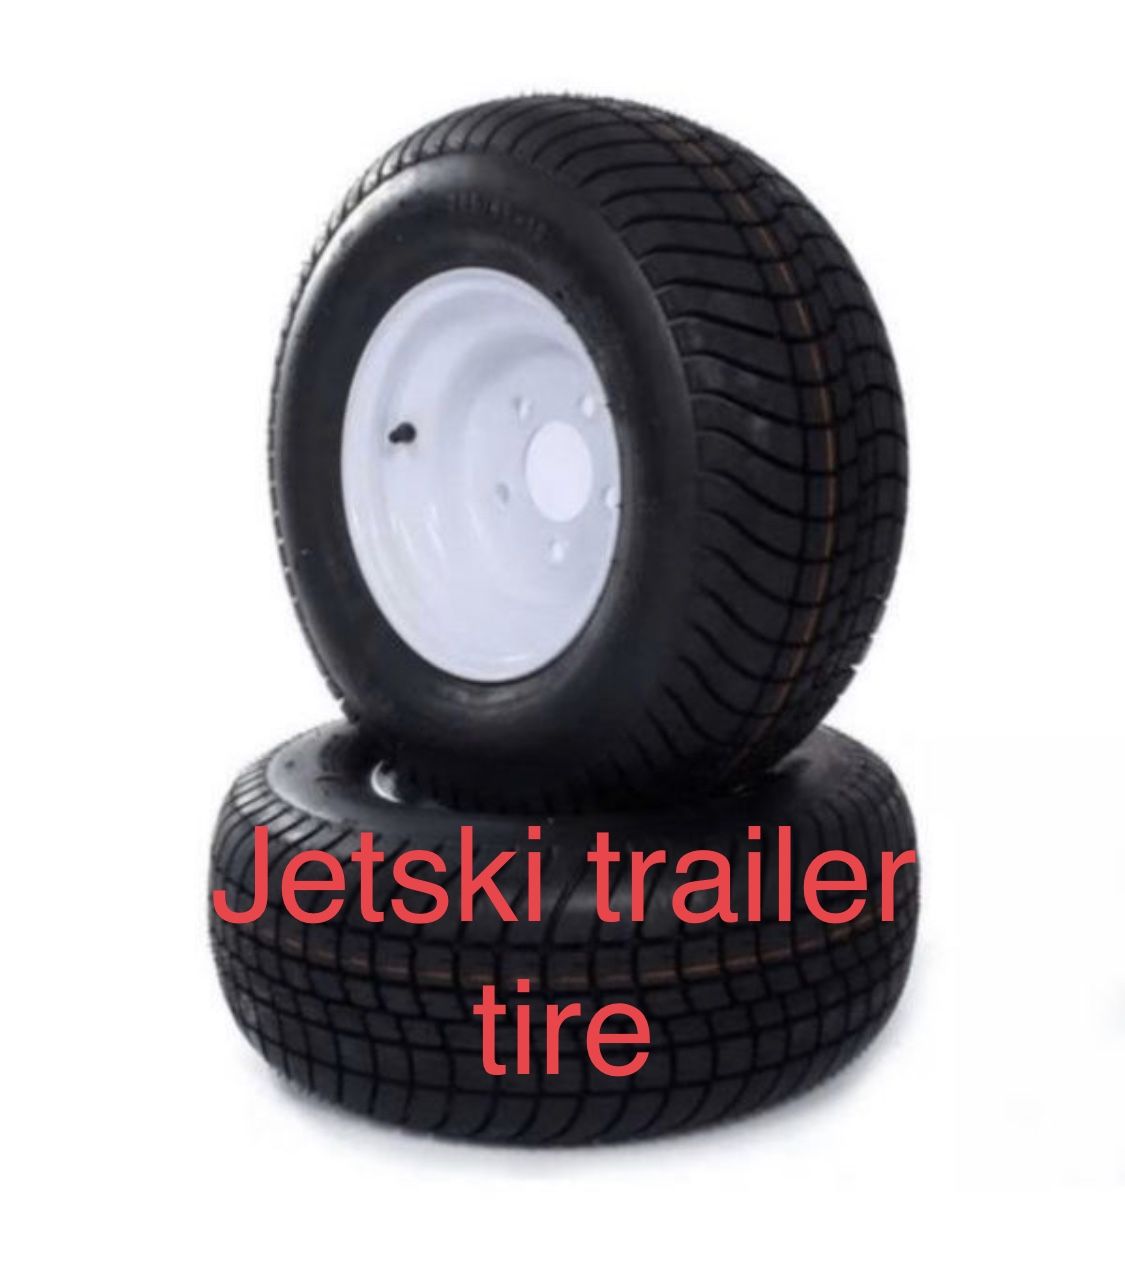 Jetski trailer tires and rims fits boat trailers